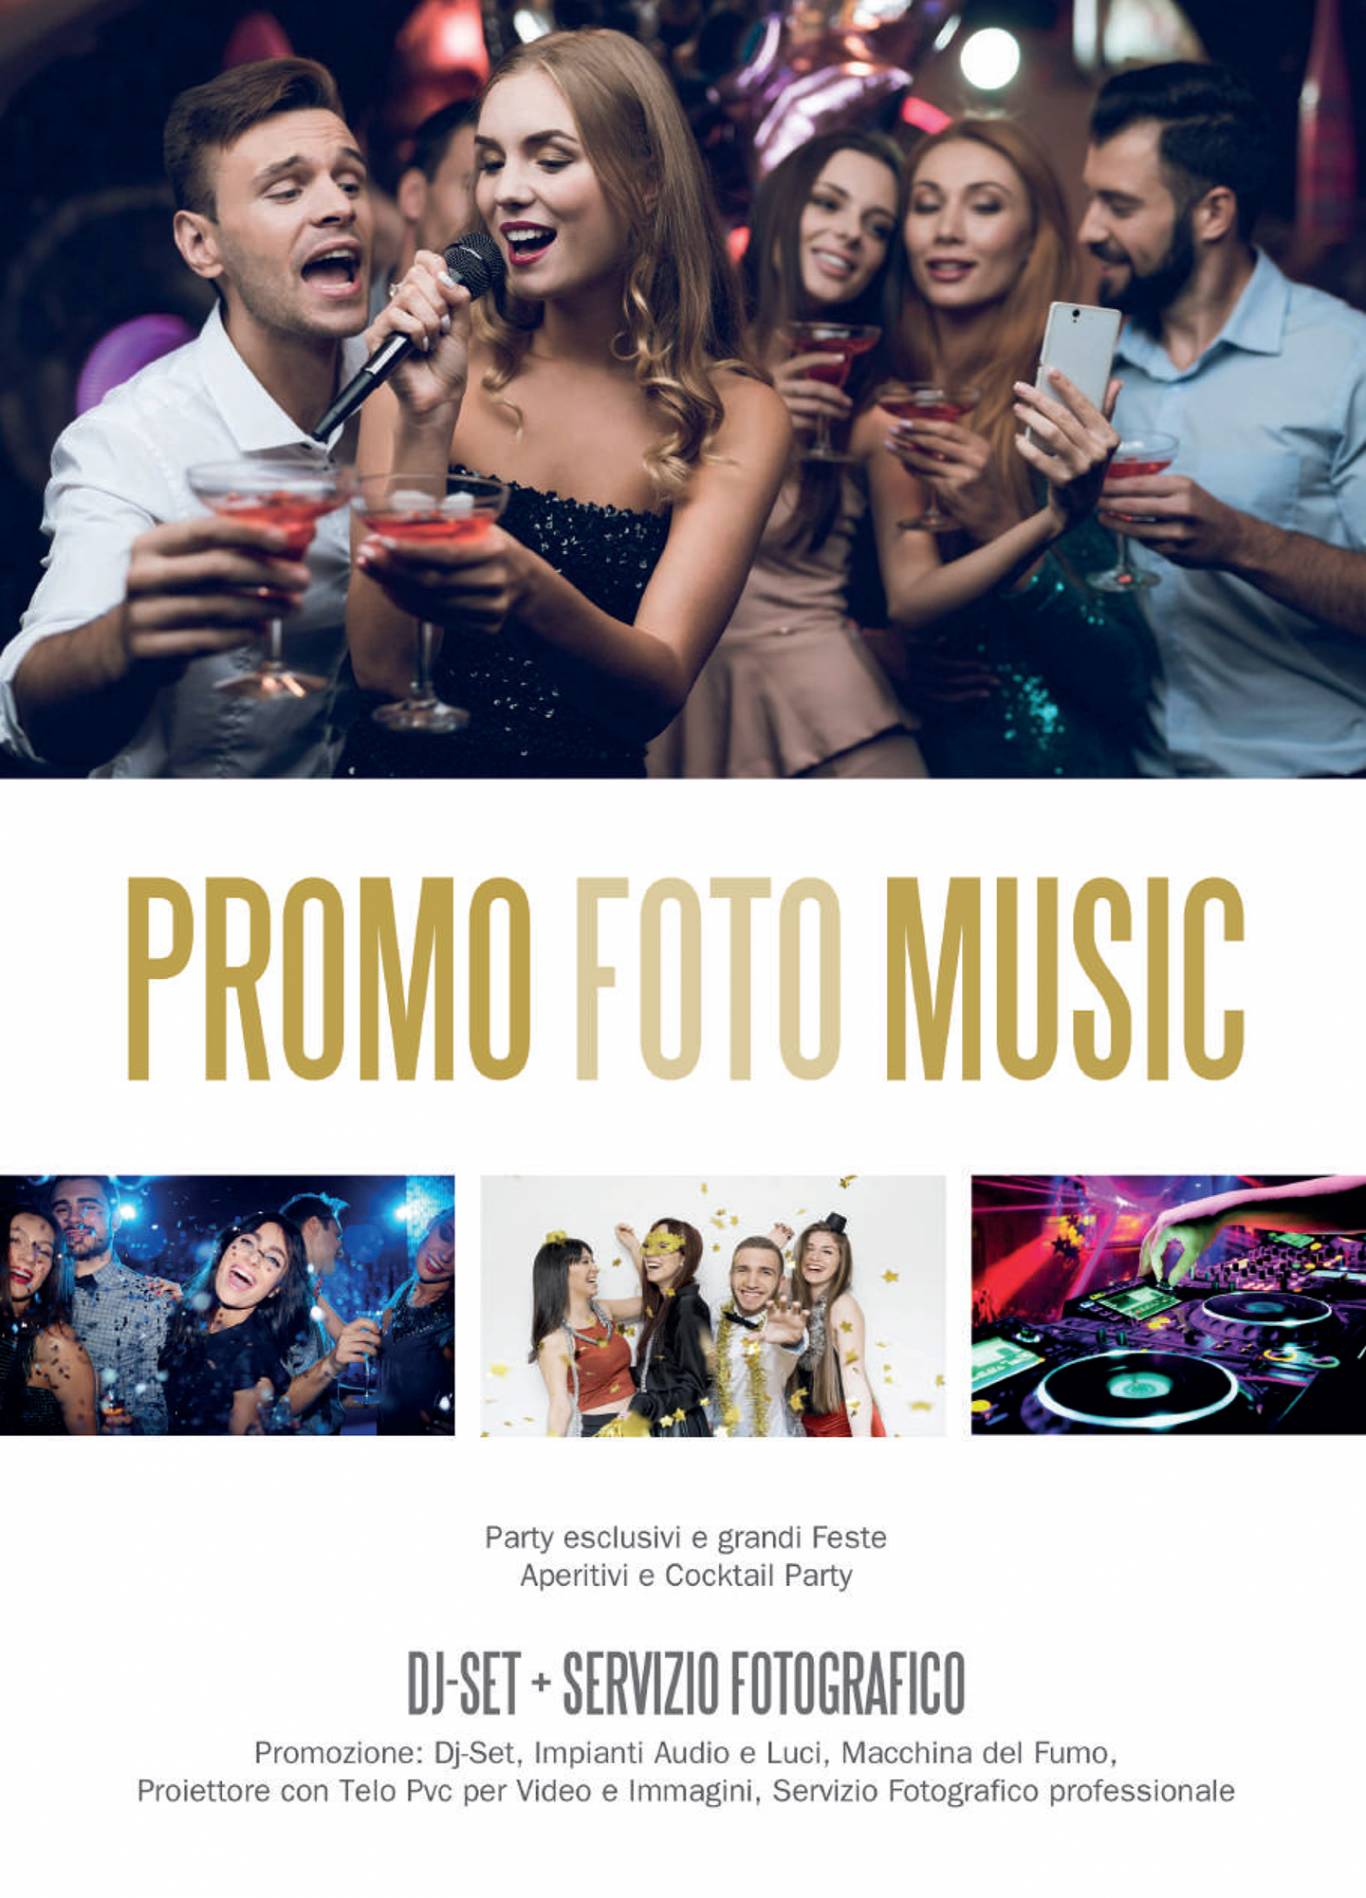 PROMO-PARTY-FOTO-MUSIC